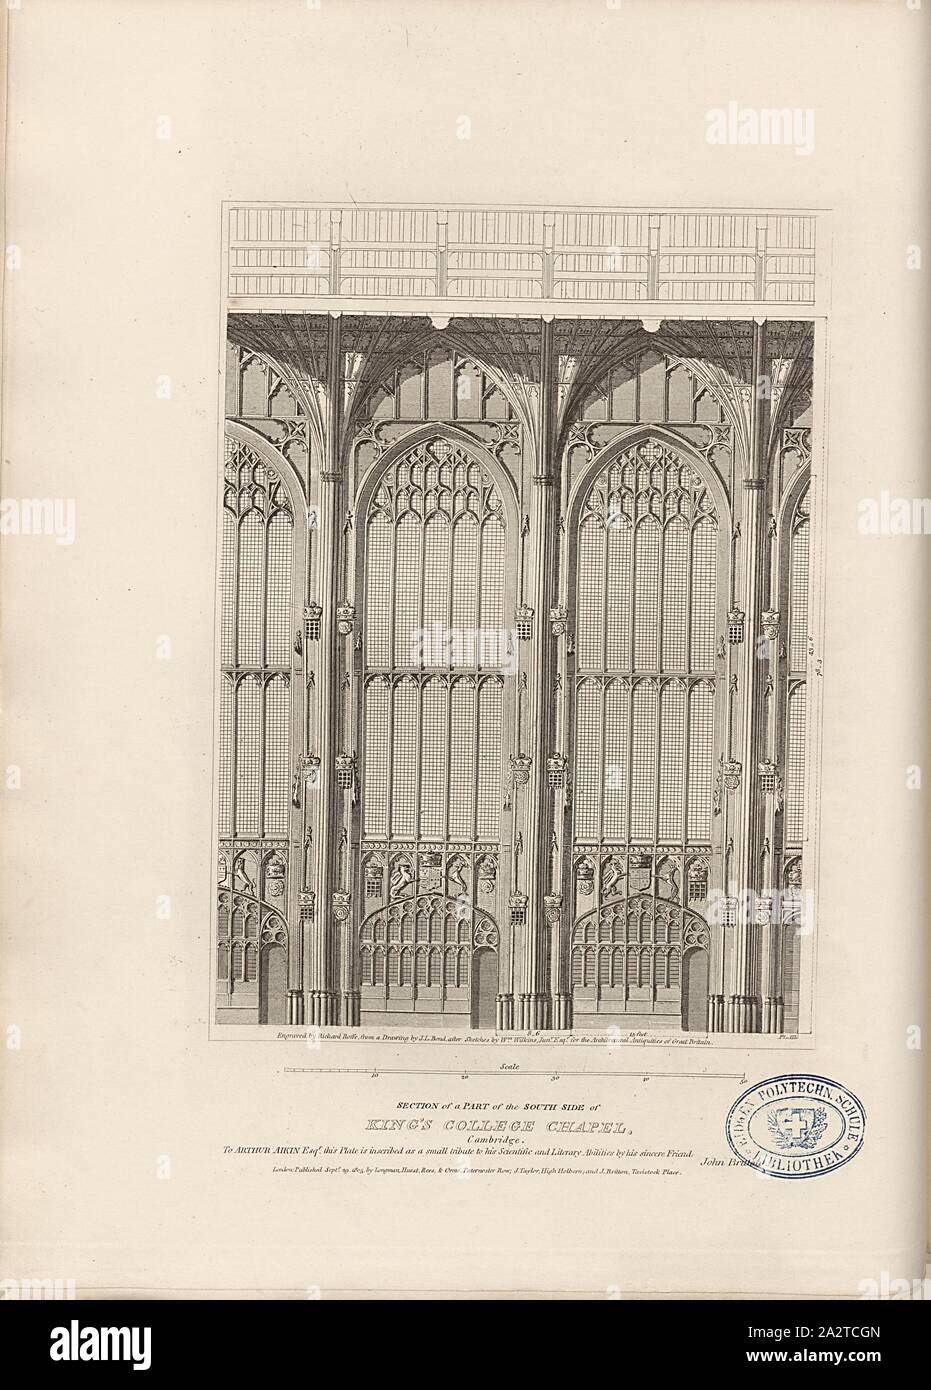 Section of a Part of the South Side of King's College Chapel, Cambridge, South facade of Chapel of King's College in Cambridge, signed: Engraved by Richard Roffe, from a Drawing by J.L. Bond, after Sketches by Wm Wilkins, Fig. 13, Pl. III, to p. 8, Wilkins, William (Sketch); Bond, John Linnell (Drawing); Roffe, Richard (Engraving), 1805, John Britton: The architectural antiquities of Great Britain: represented and illustrated in a series of views, elevations, plans, sections and details of various ancient English edifices: with historical and descriptive accounts of each. Bd. 1. London: J Stock Photo